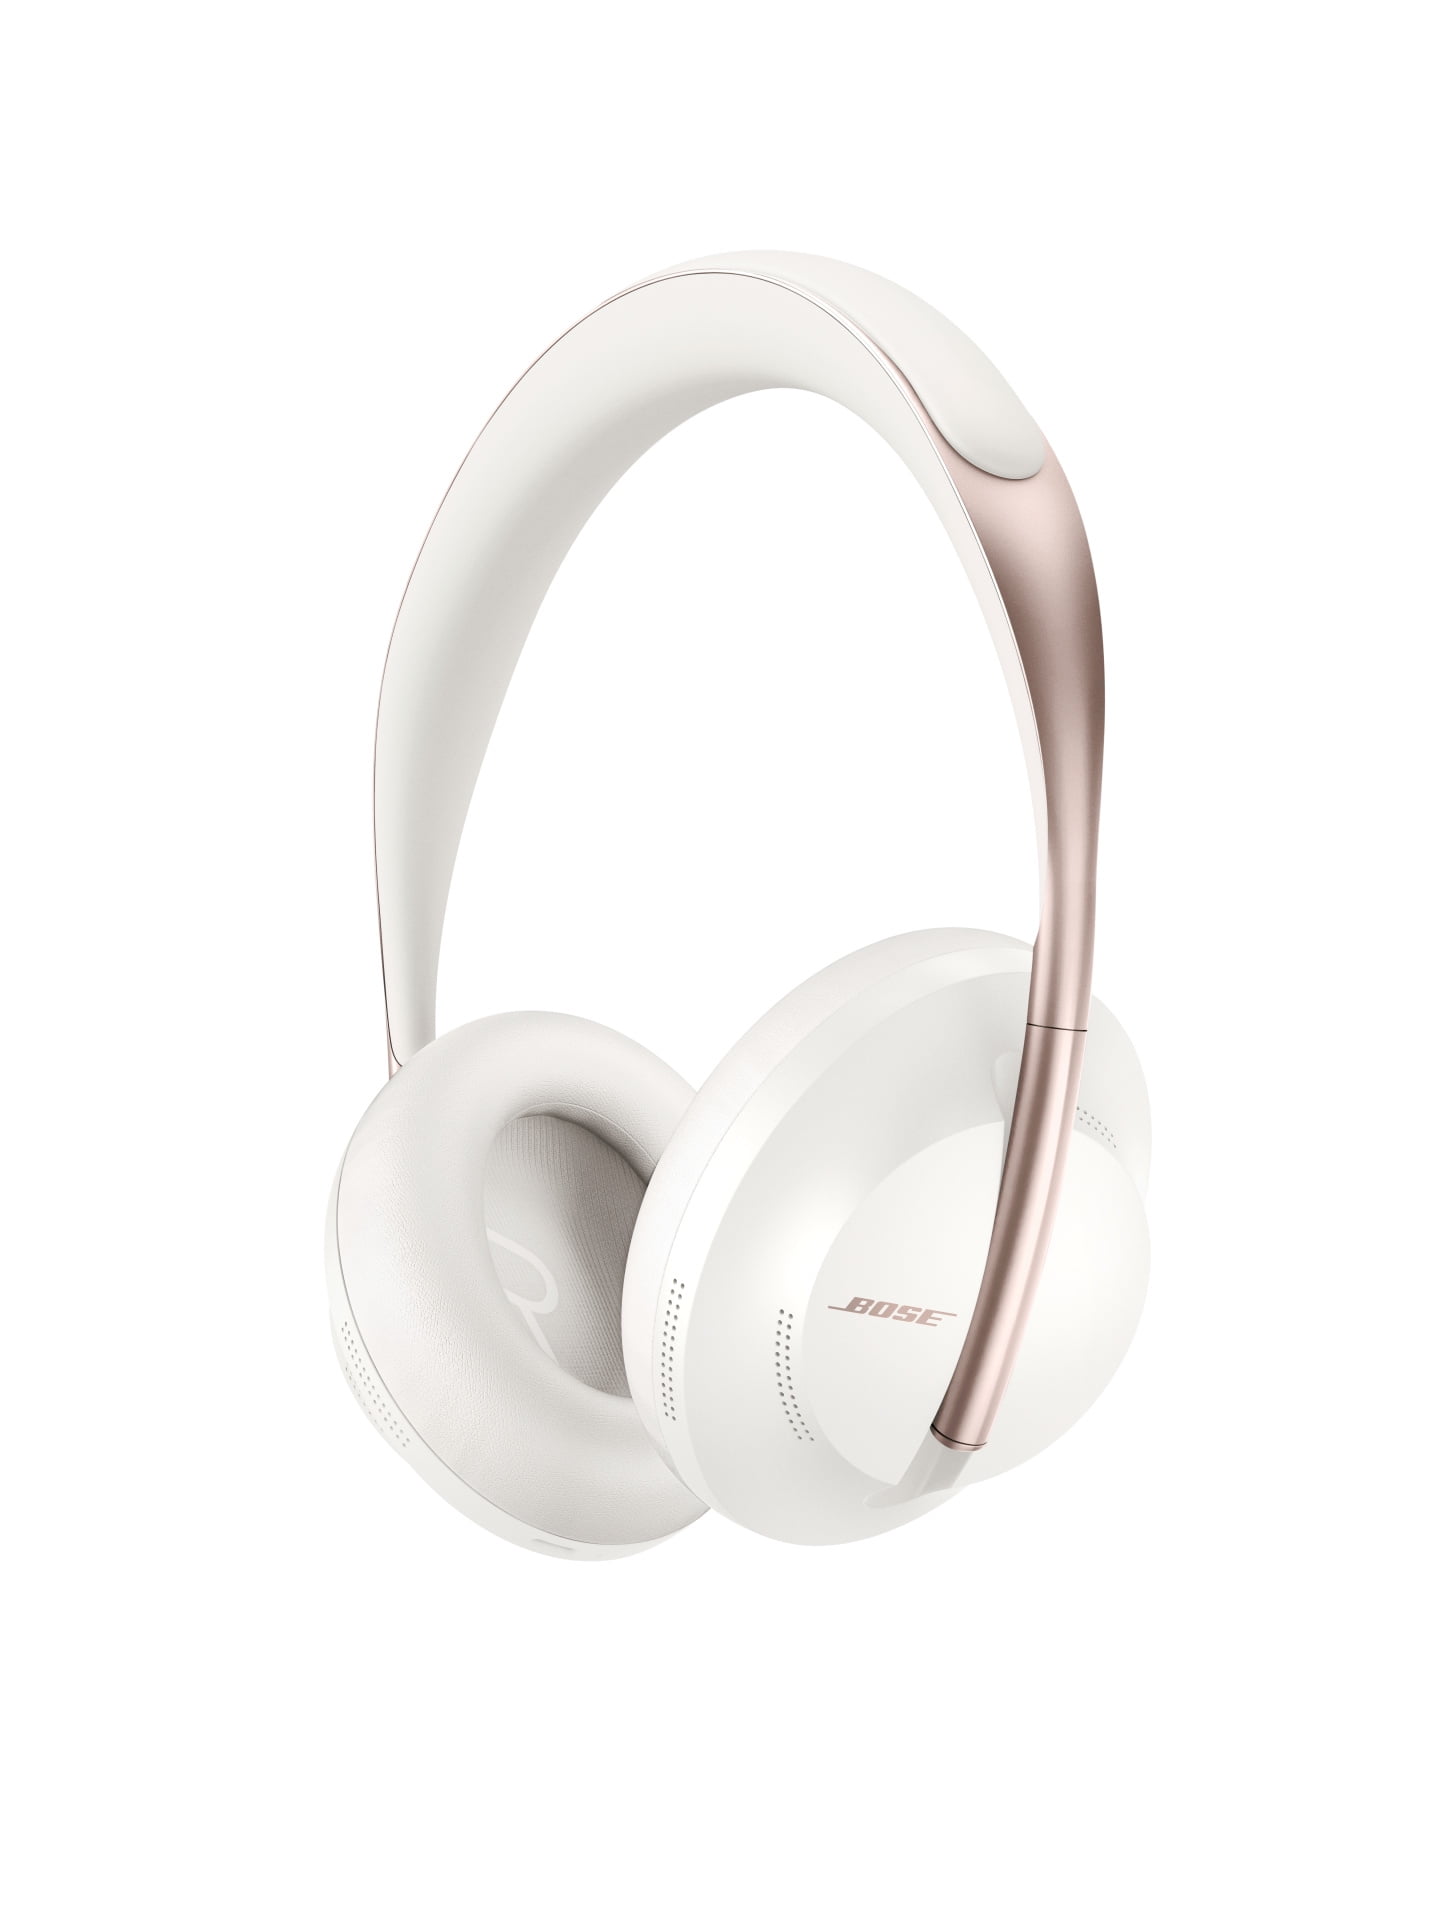 Bose Bluetooth Over-Ear Headphones, Noise Cancelling, White